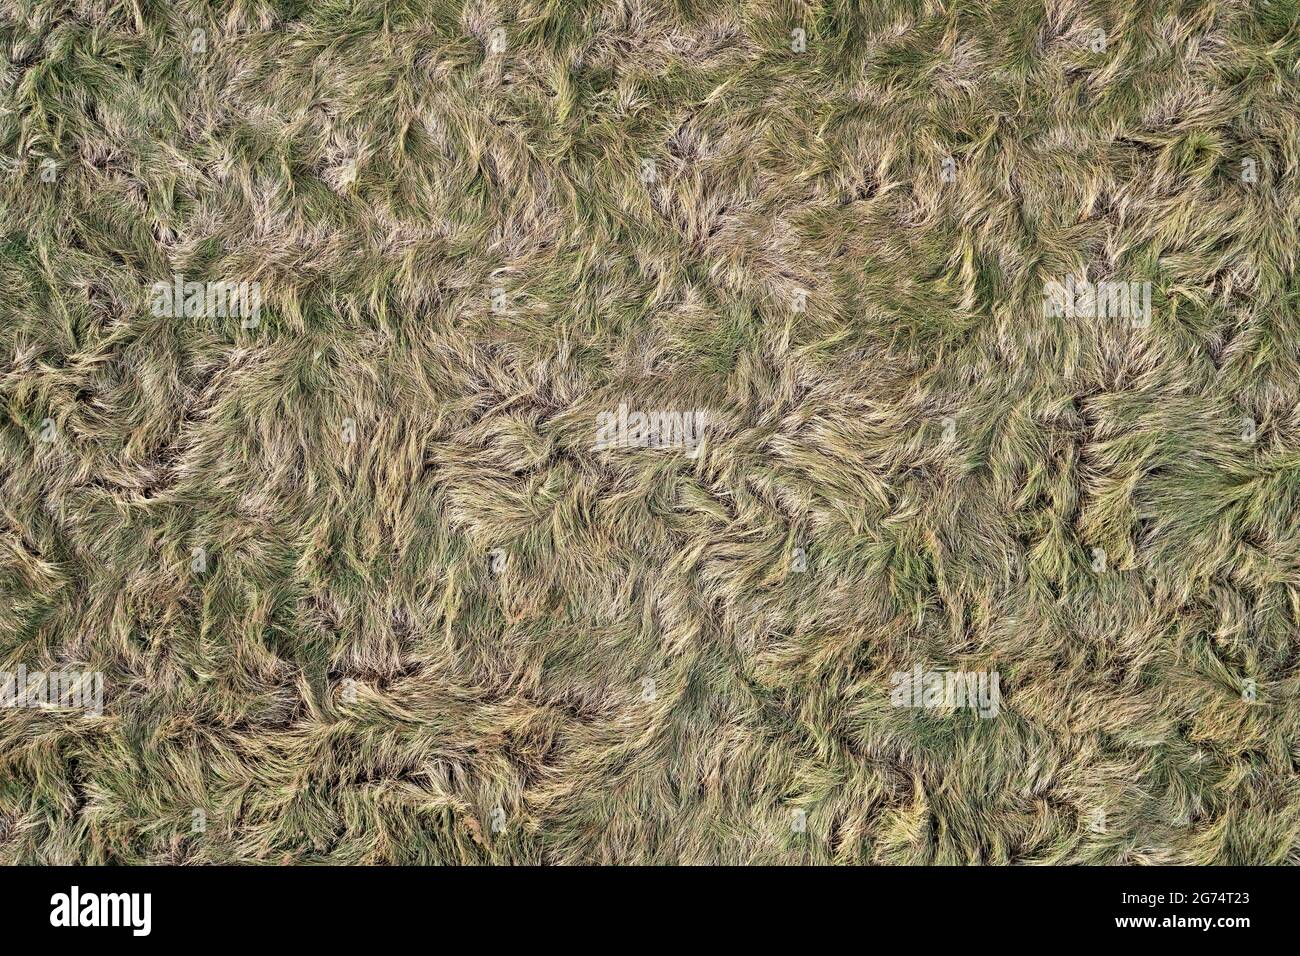 Grass/ fur texture, aerial view of empty grass field with copy space Stock Photo